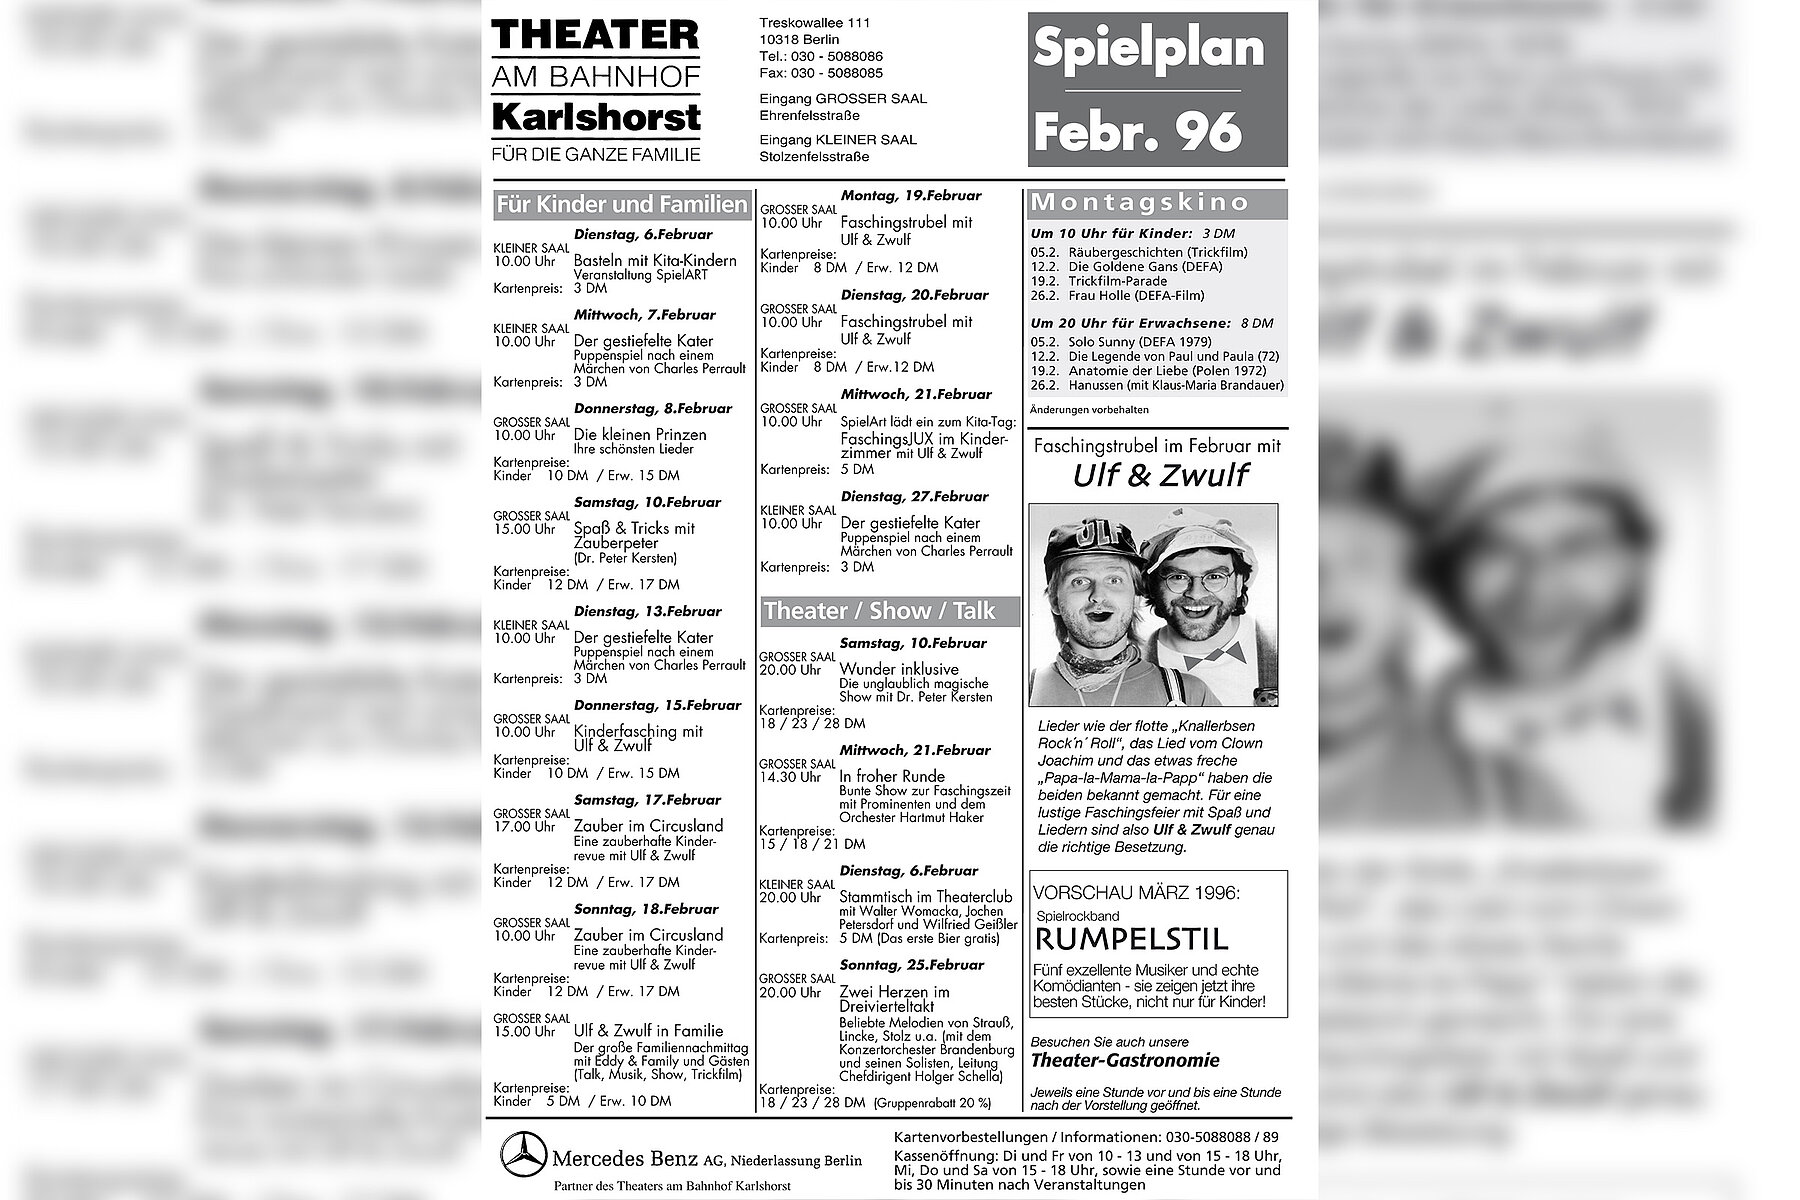 The play schedule of Karlshorst Theatre from February 1996.